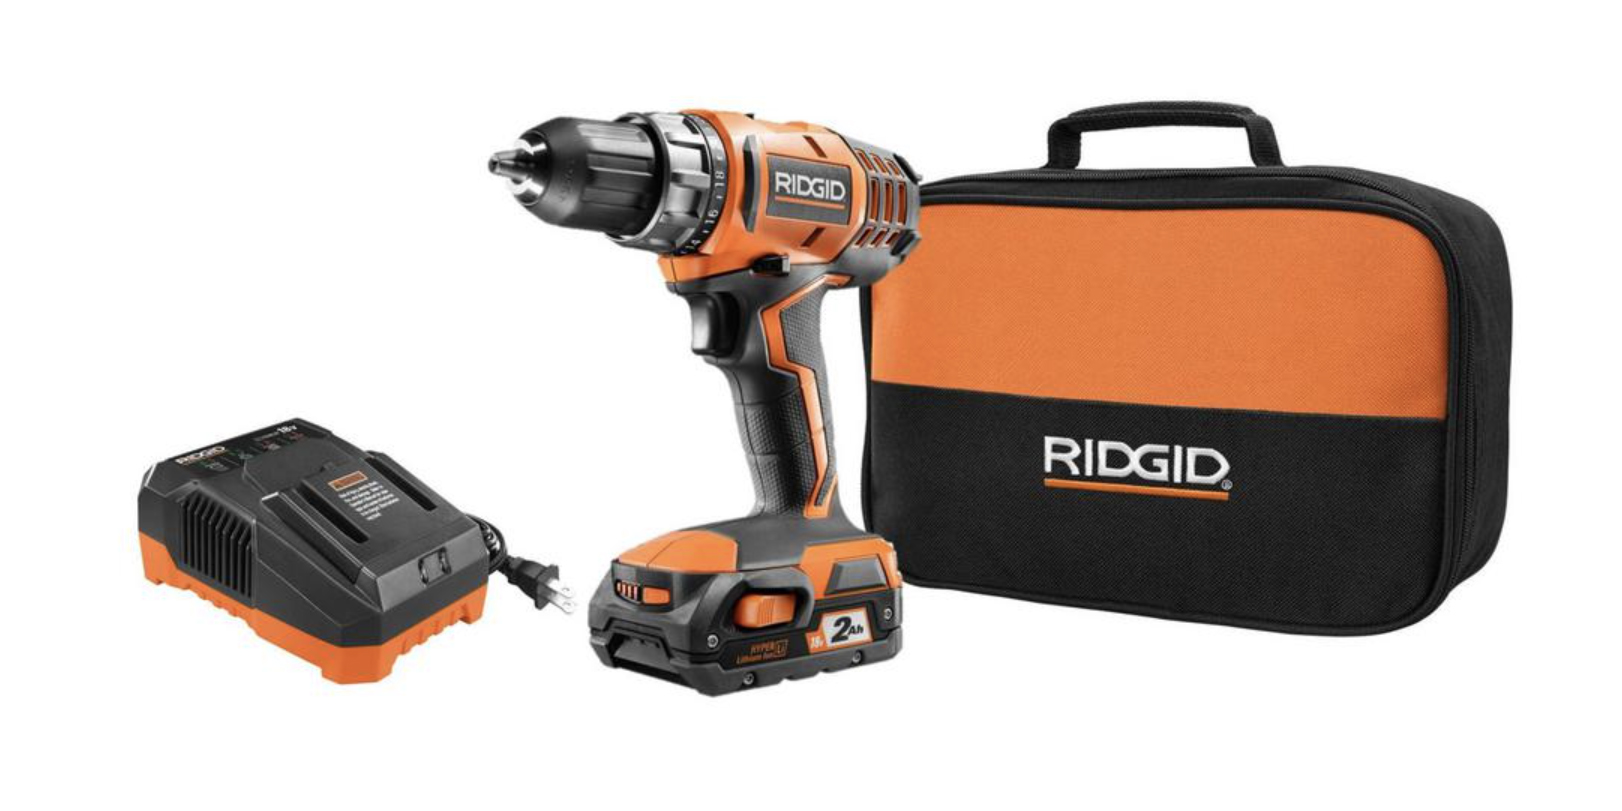 Home Depot's RIDGID Black Friday tool sale takes up to 40 off DIY